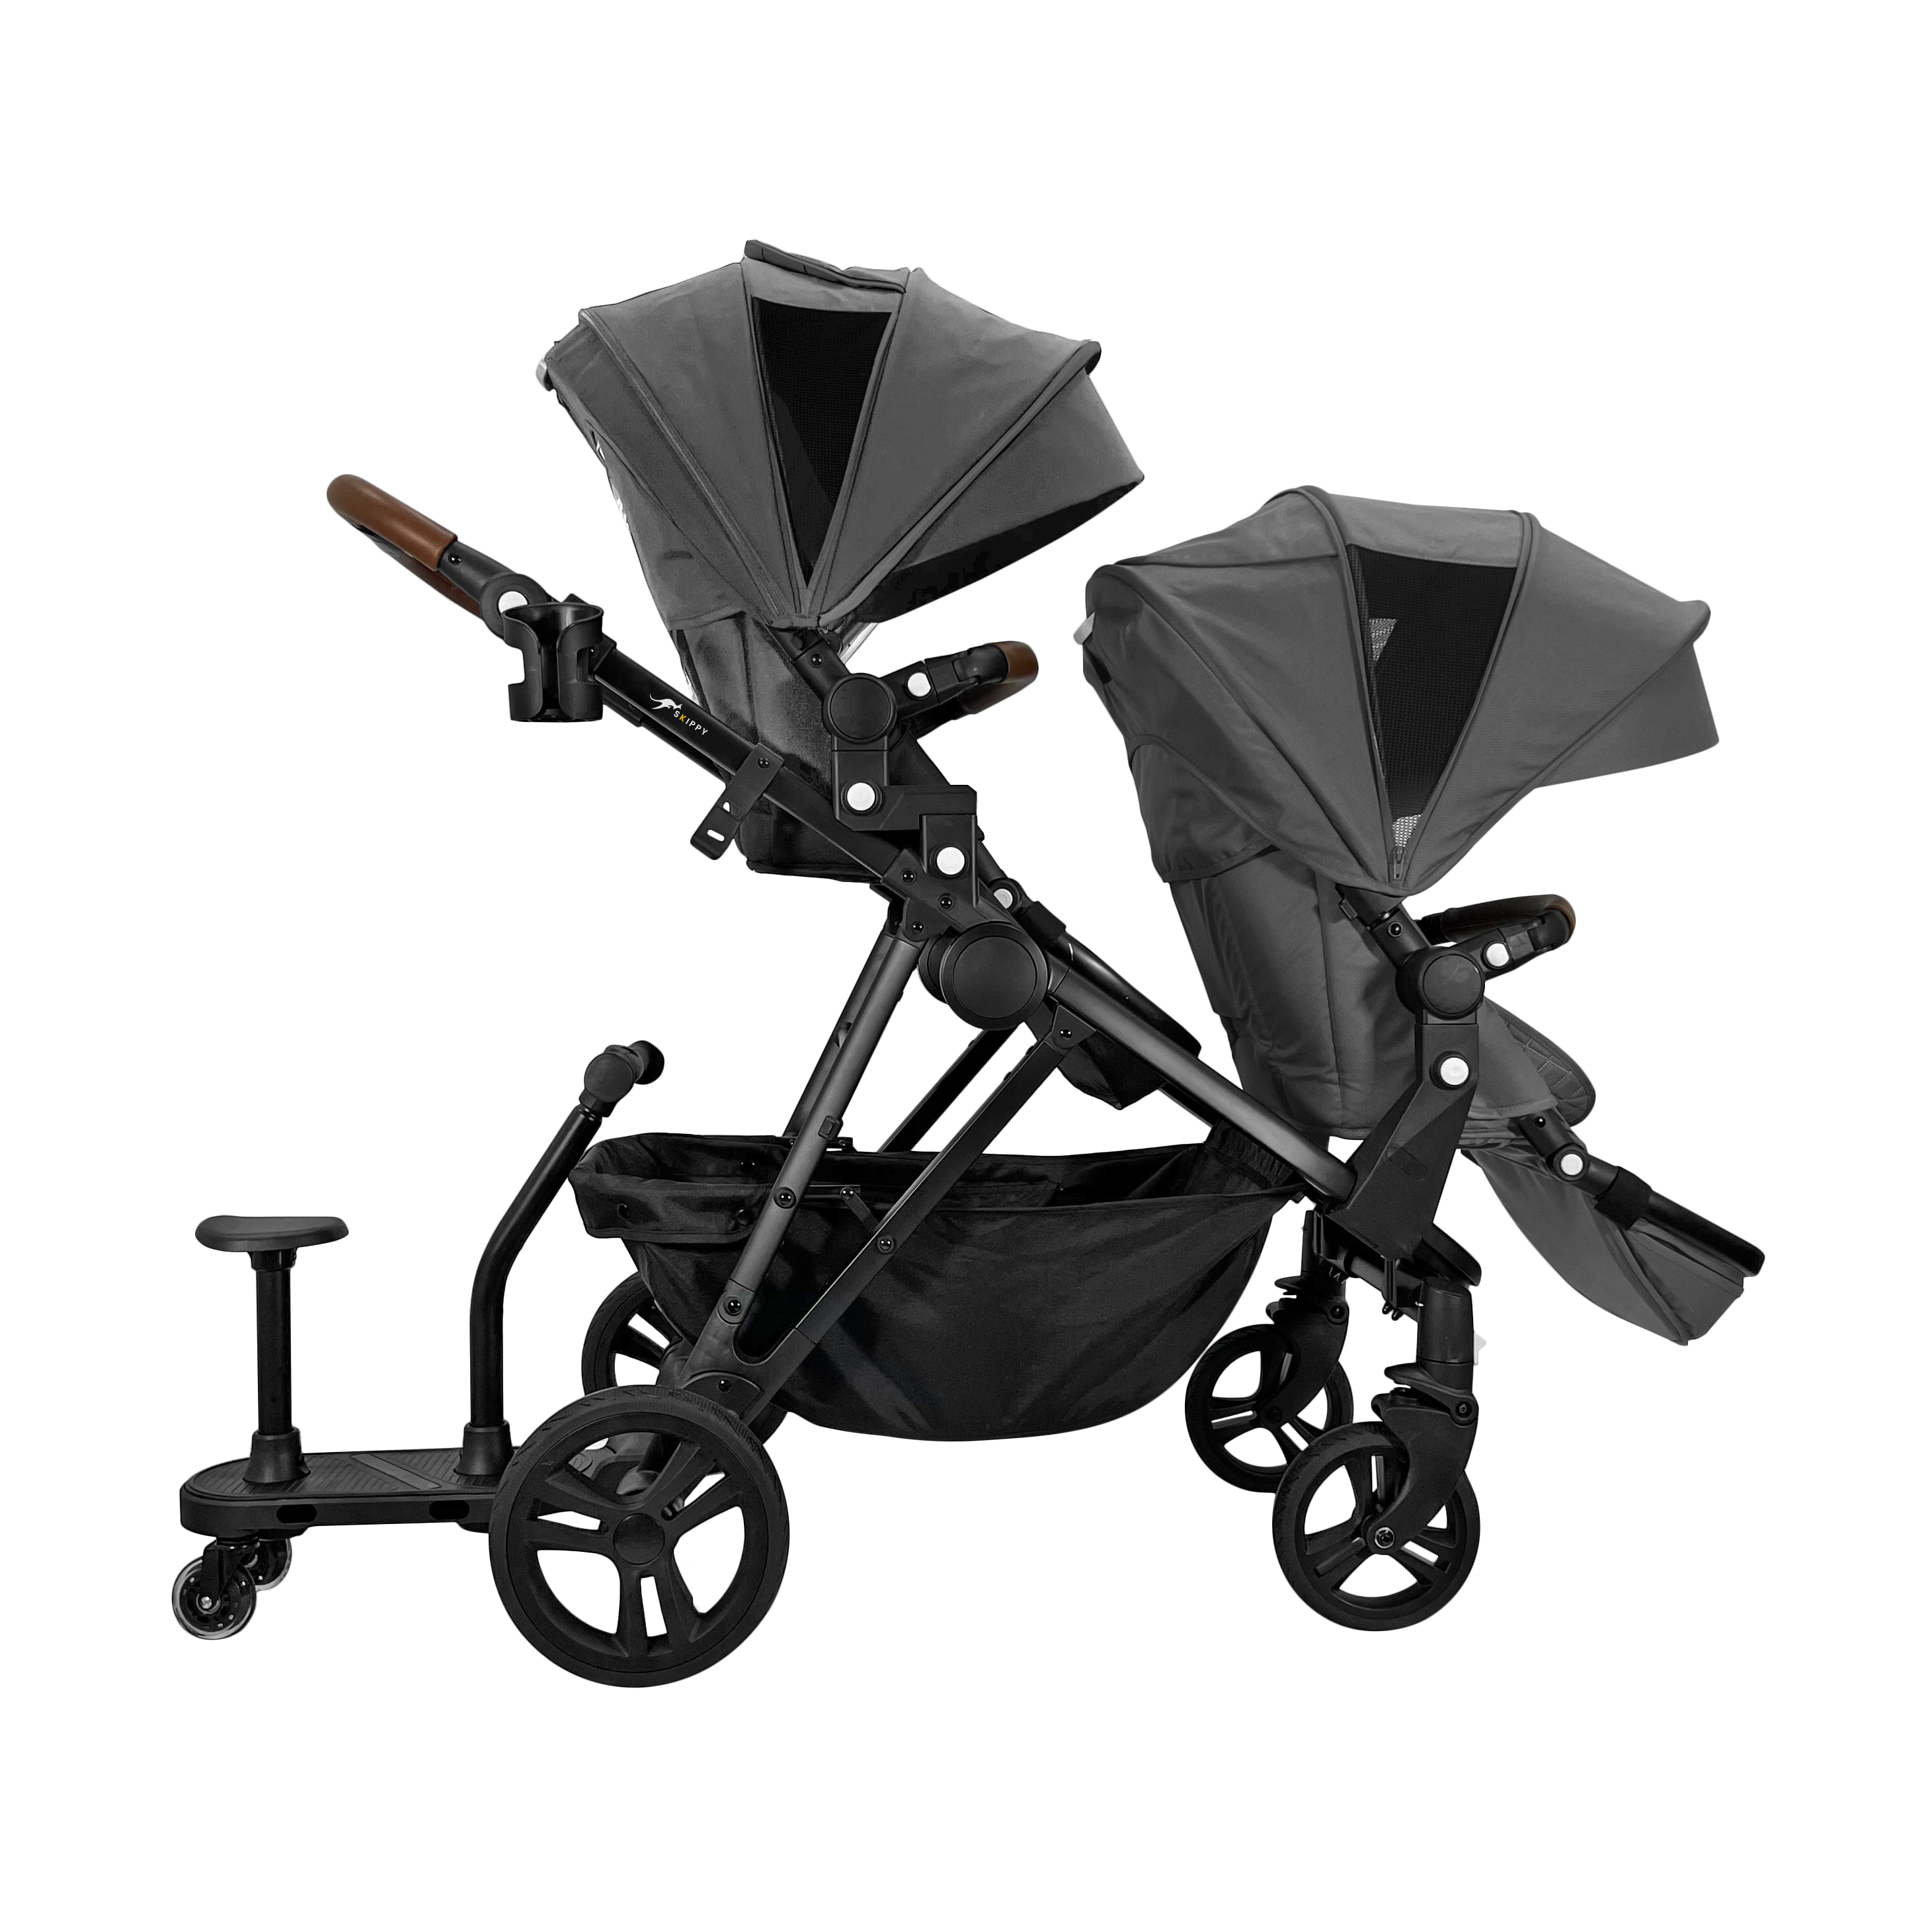 Lusso 2 Double Pram - Damaged Box Clearance